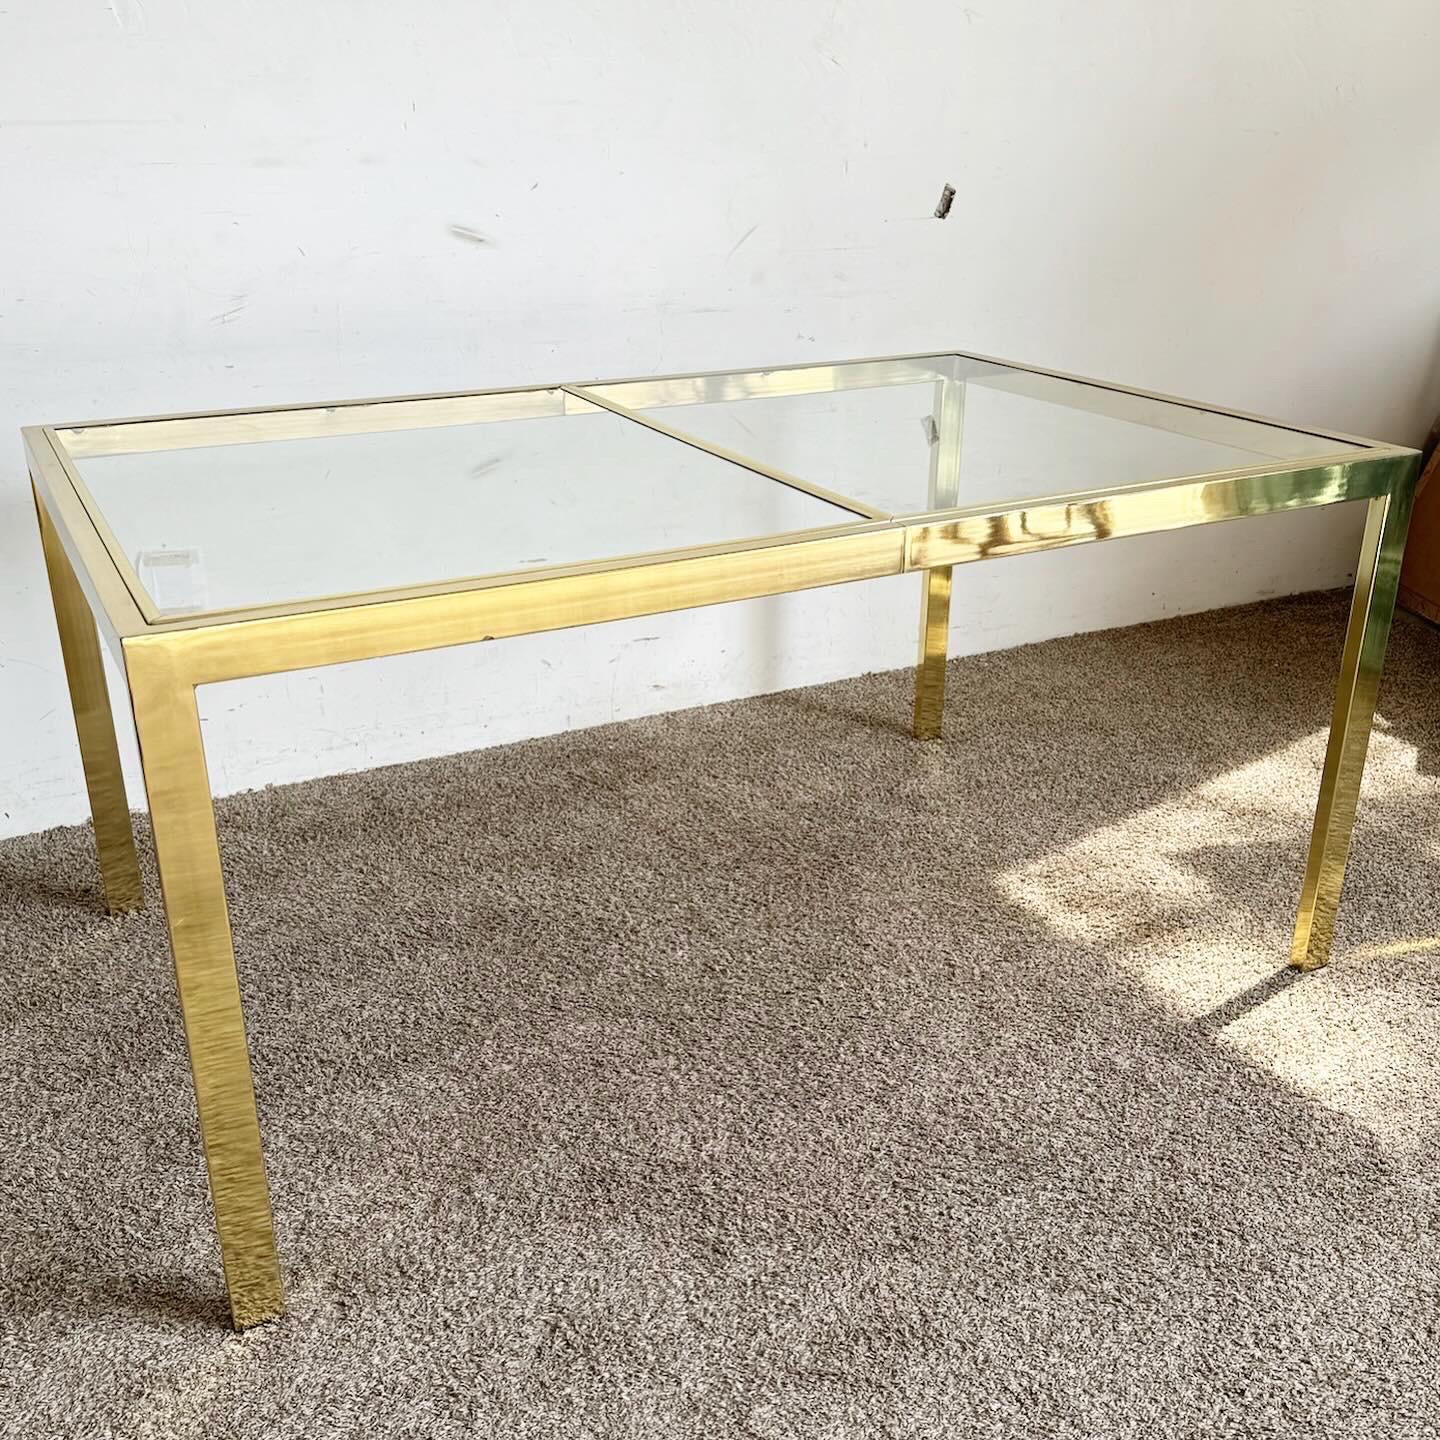 The Hollywood Regency Gold and Glass Dining Table by DIA is a statement of elegance and luxury. With its opulent gold frame and sleek glass top, this table embodies the glamorous Hollywood Regency style. Ideal for those seeking a blend of classic